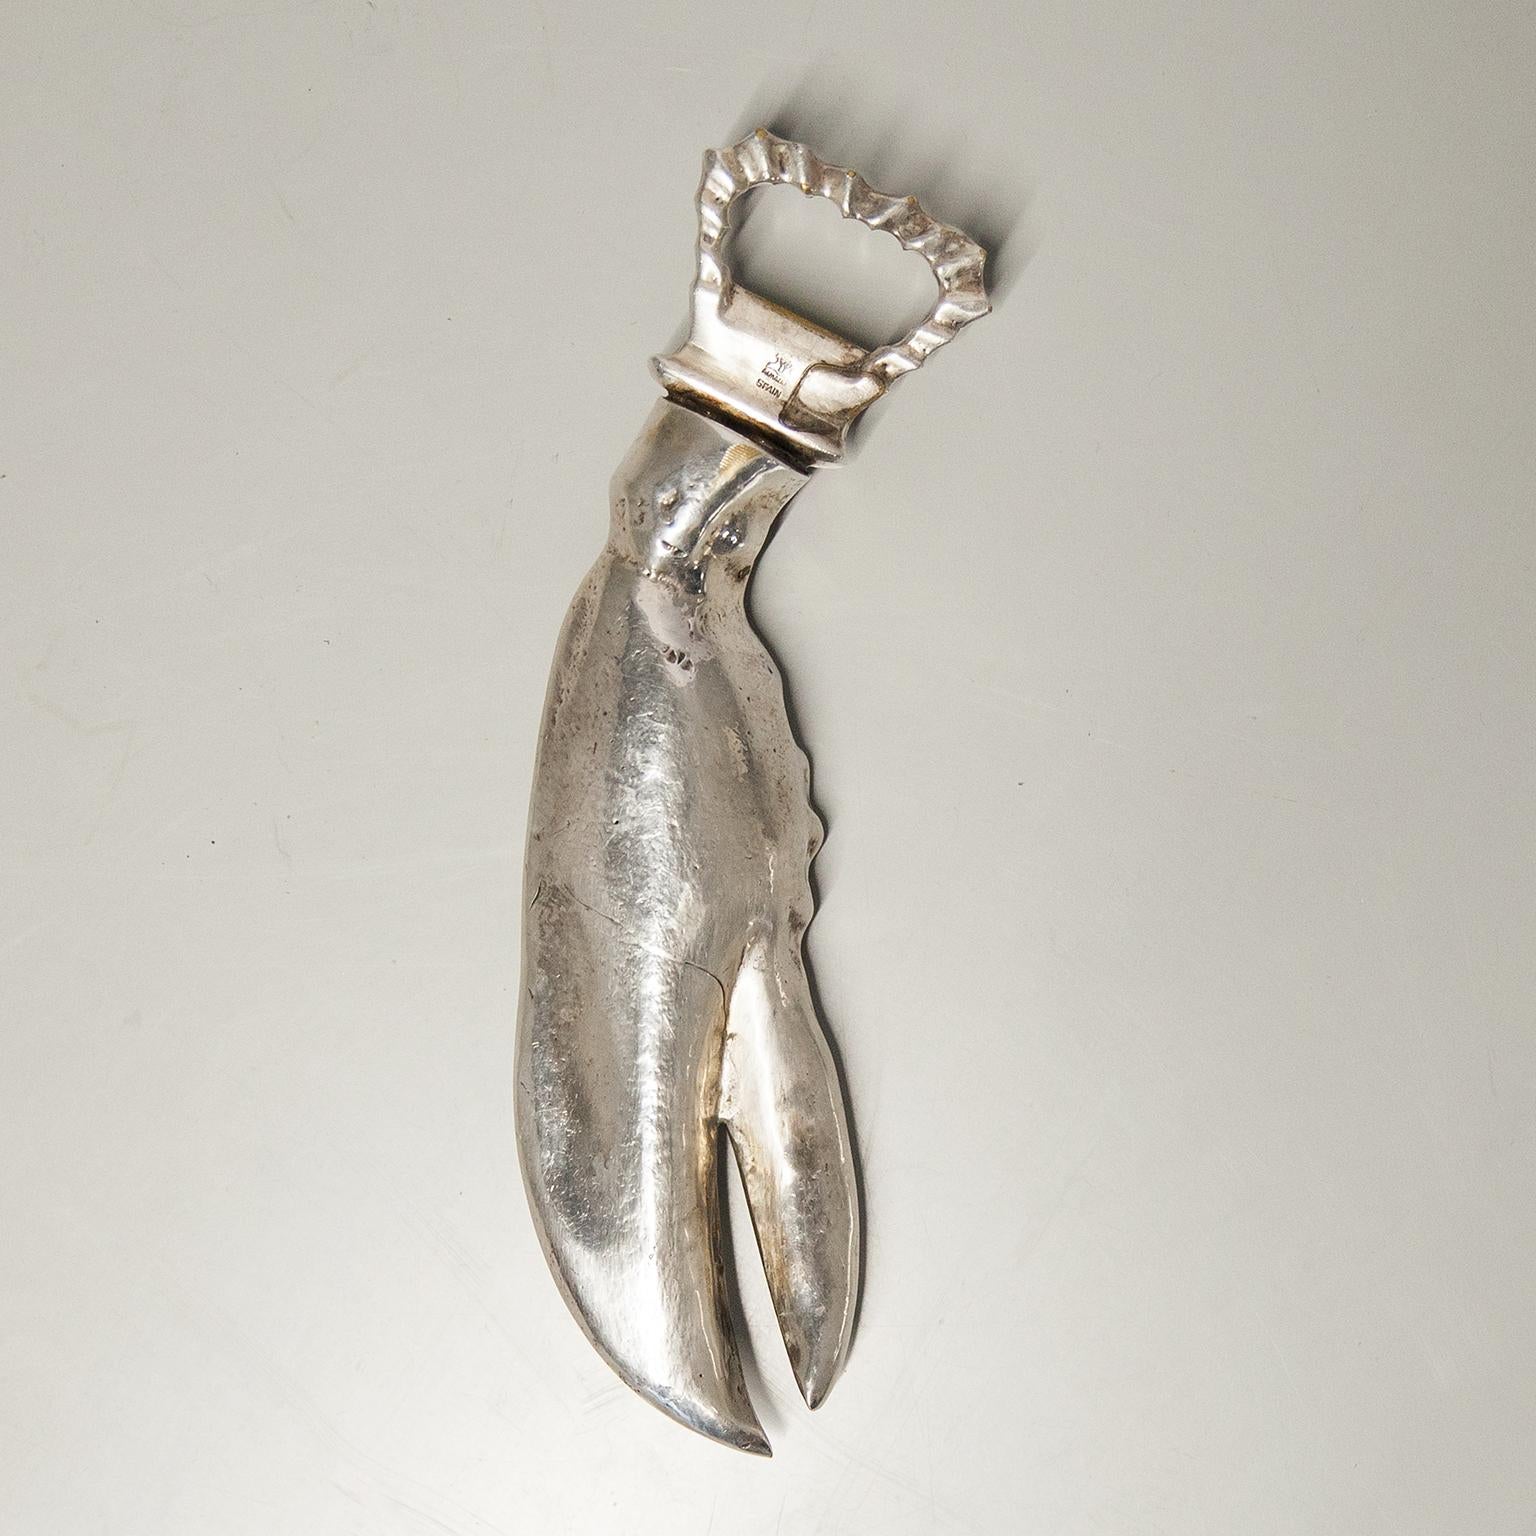 Wonderful silver plate lobster bottle opener designed like a sculpture, made in Spain in the 1970s.
